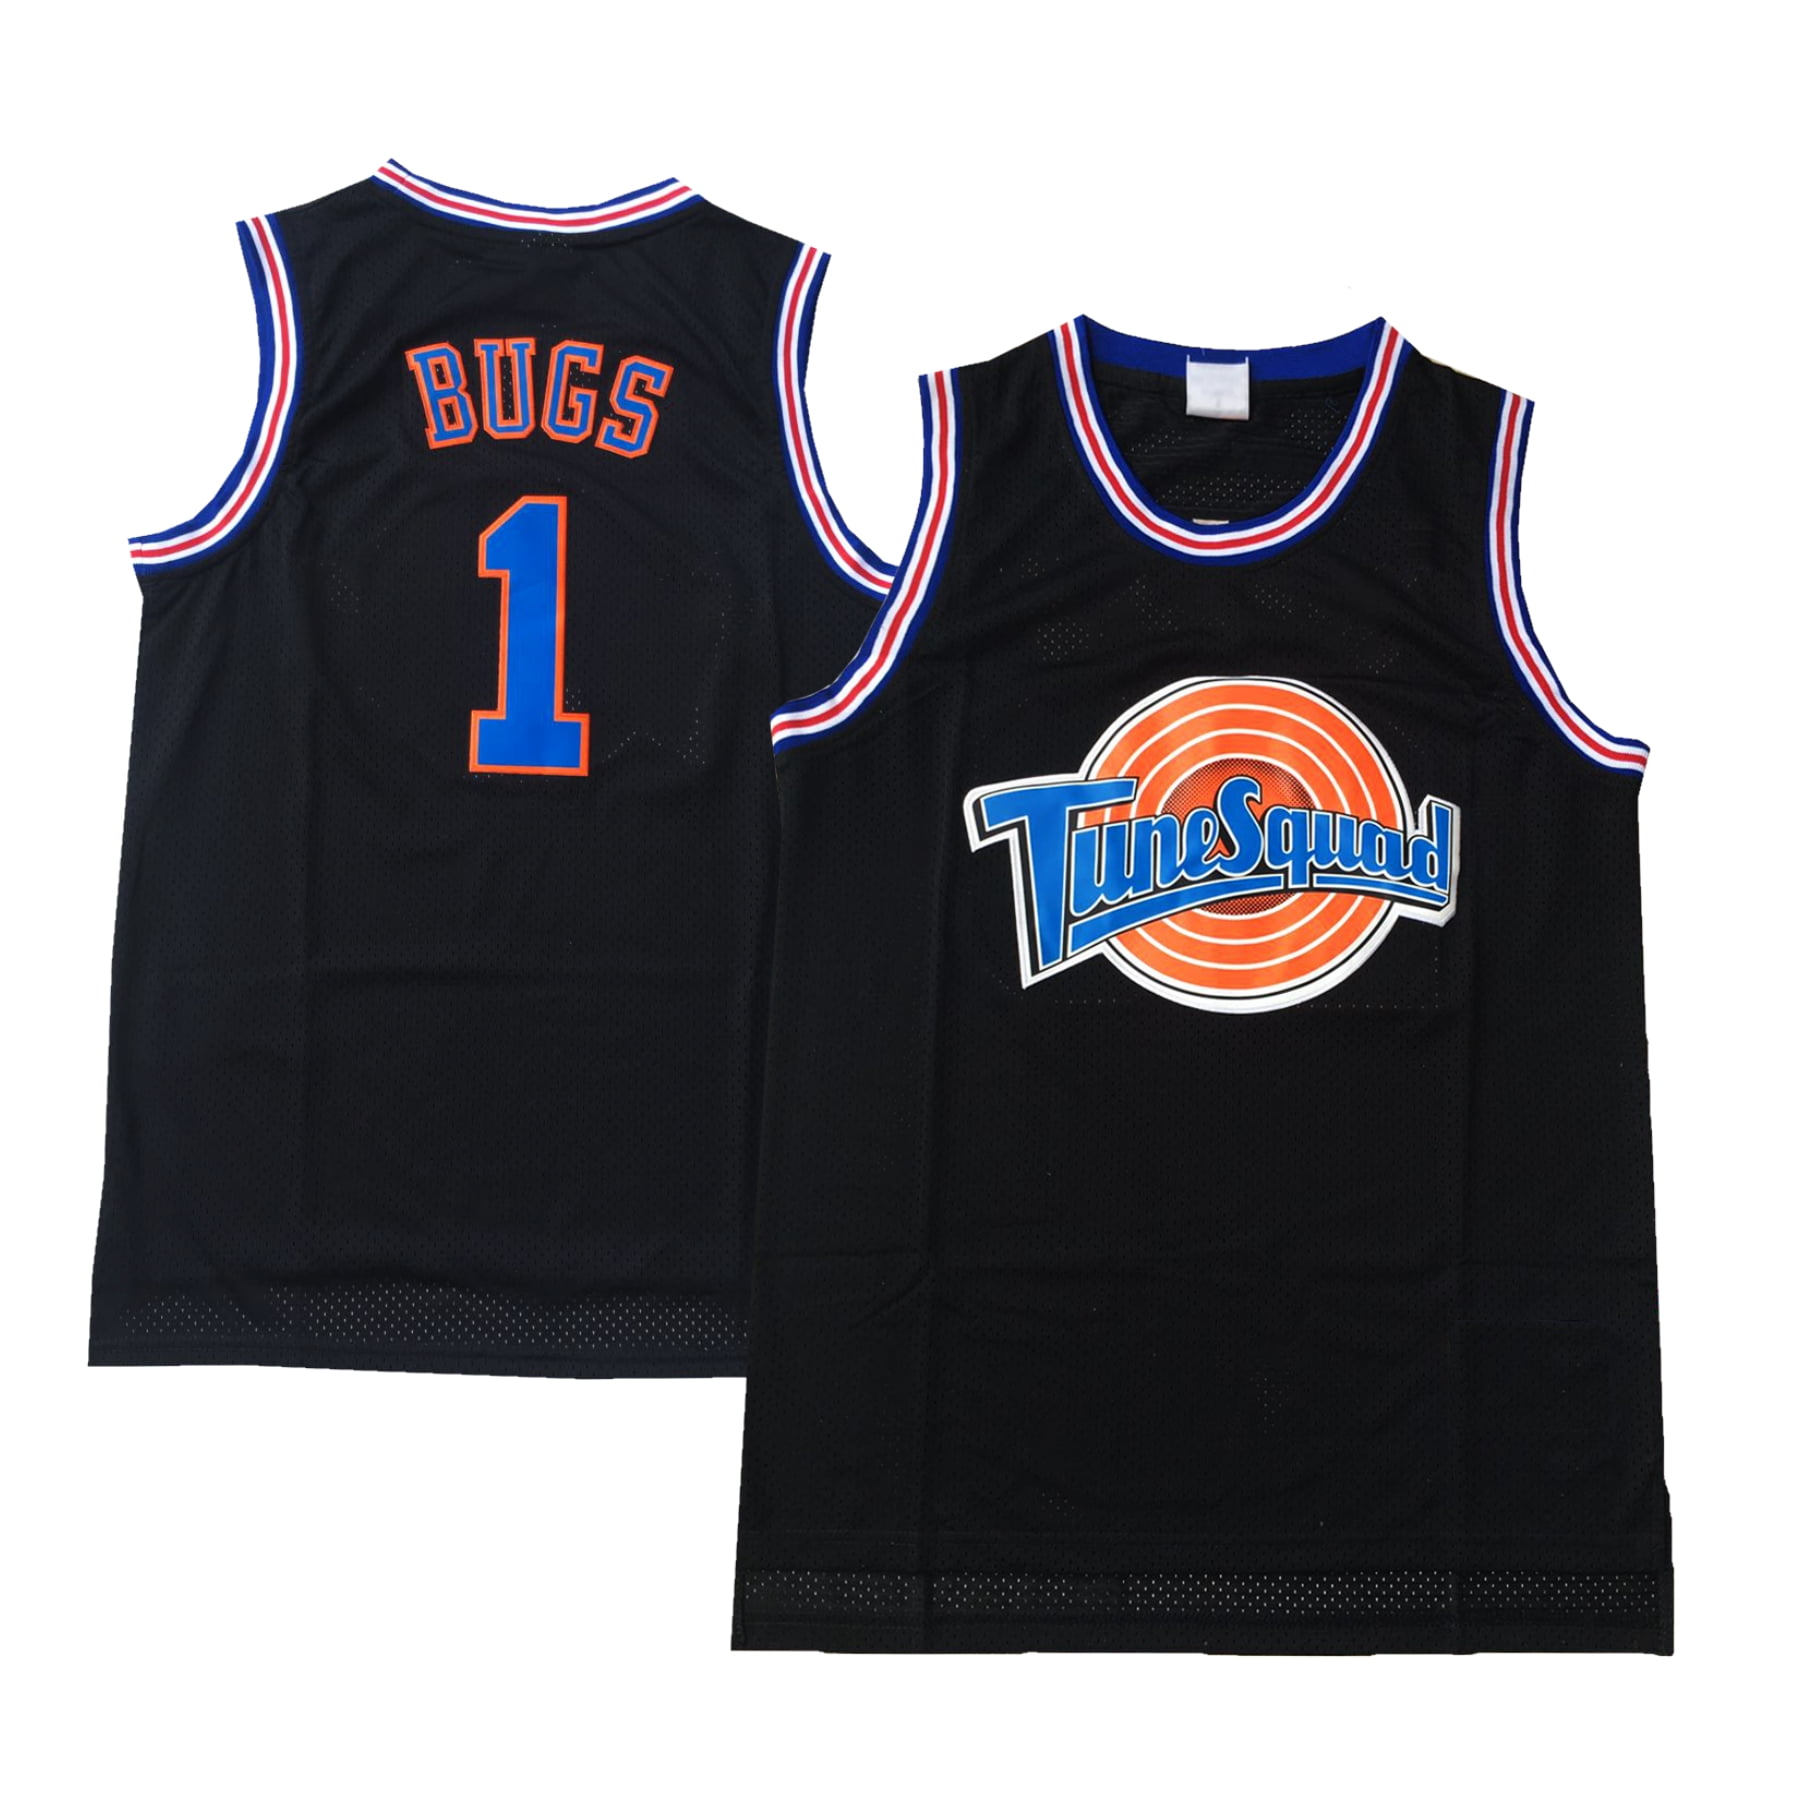 bugs bunny toon squad jersey